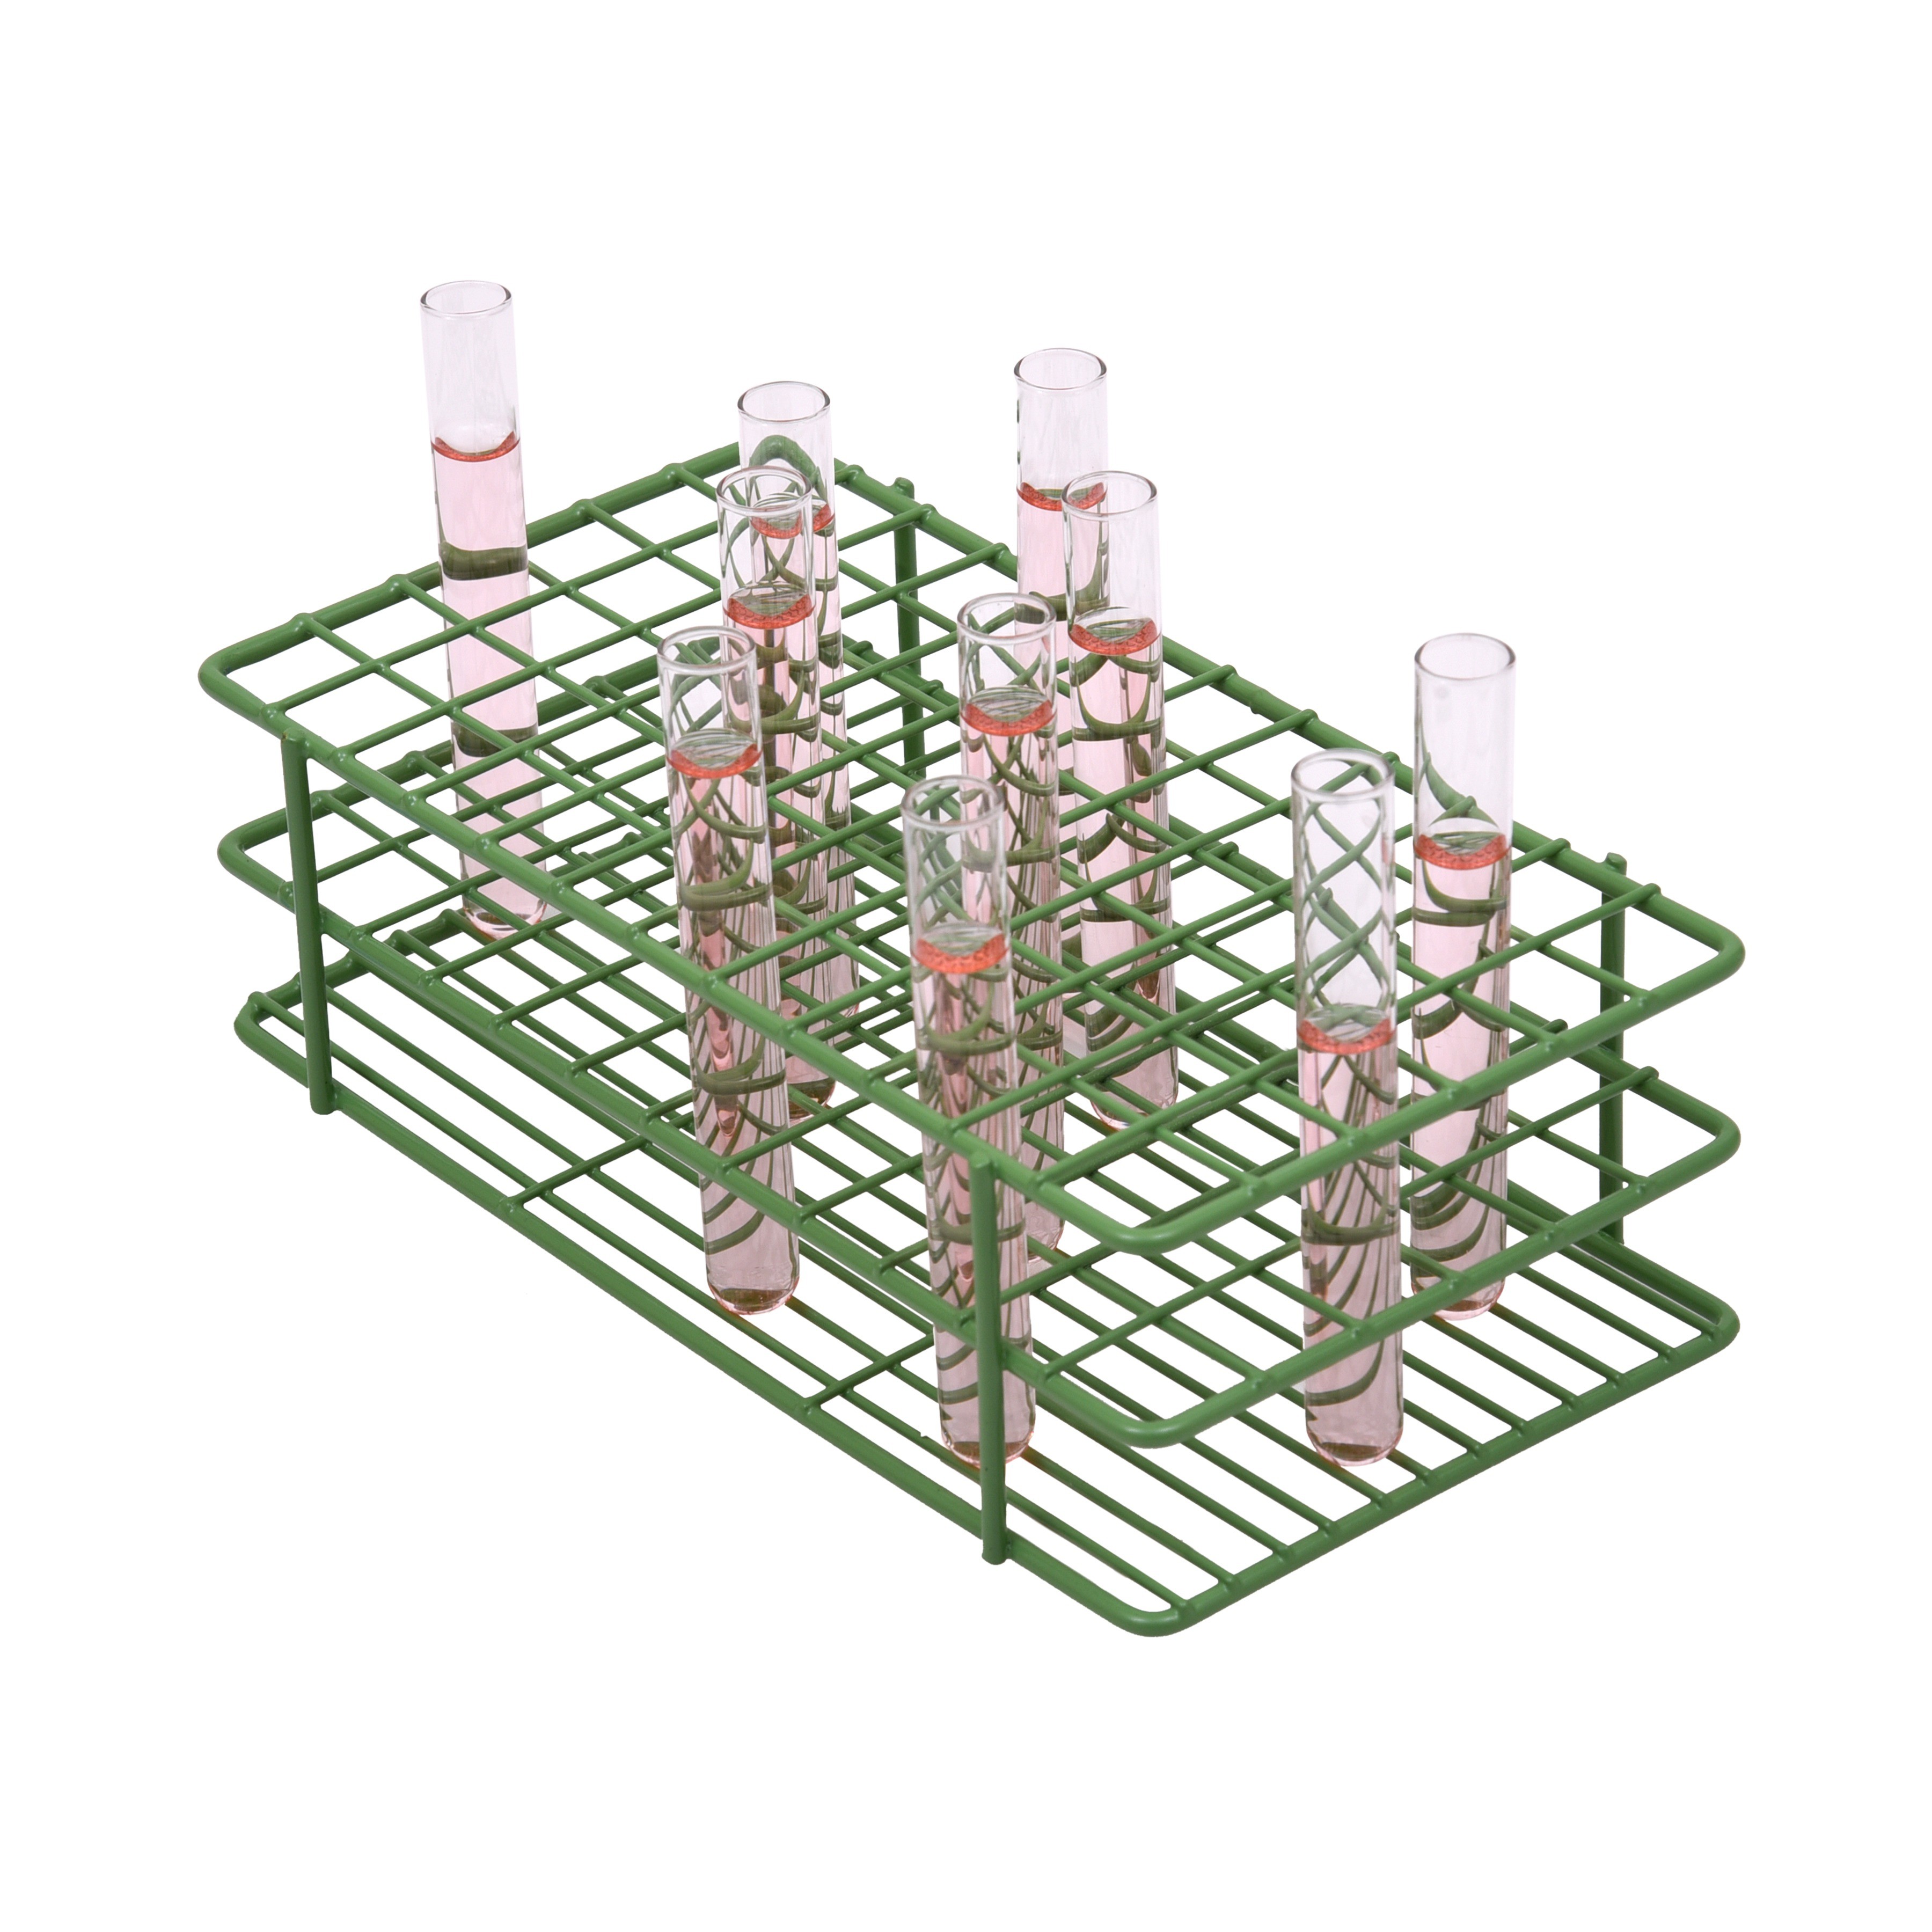 SP Bel-Art Poxygrid Test Tube Rack; For 10-13mm Tubes, 72 Places, Green